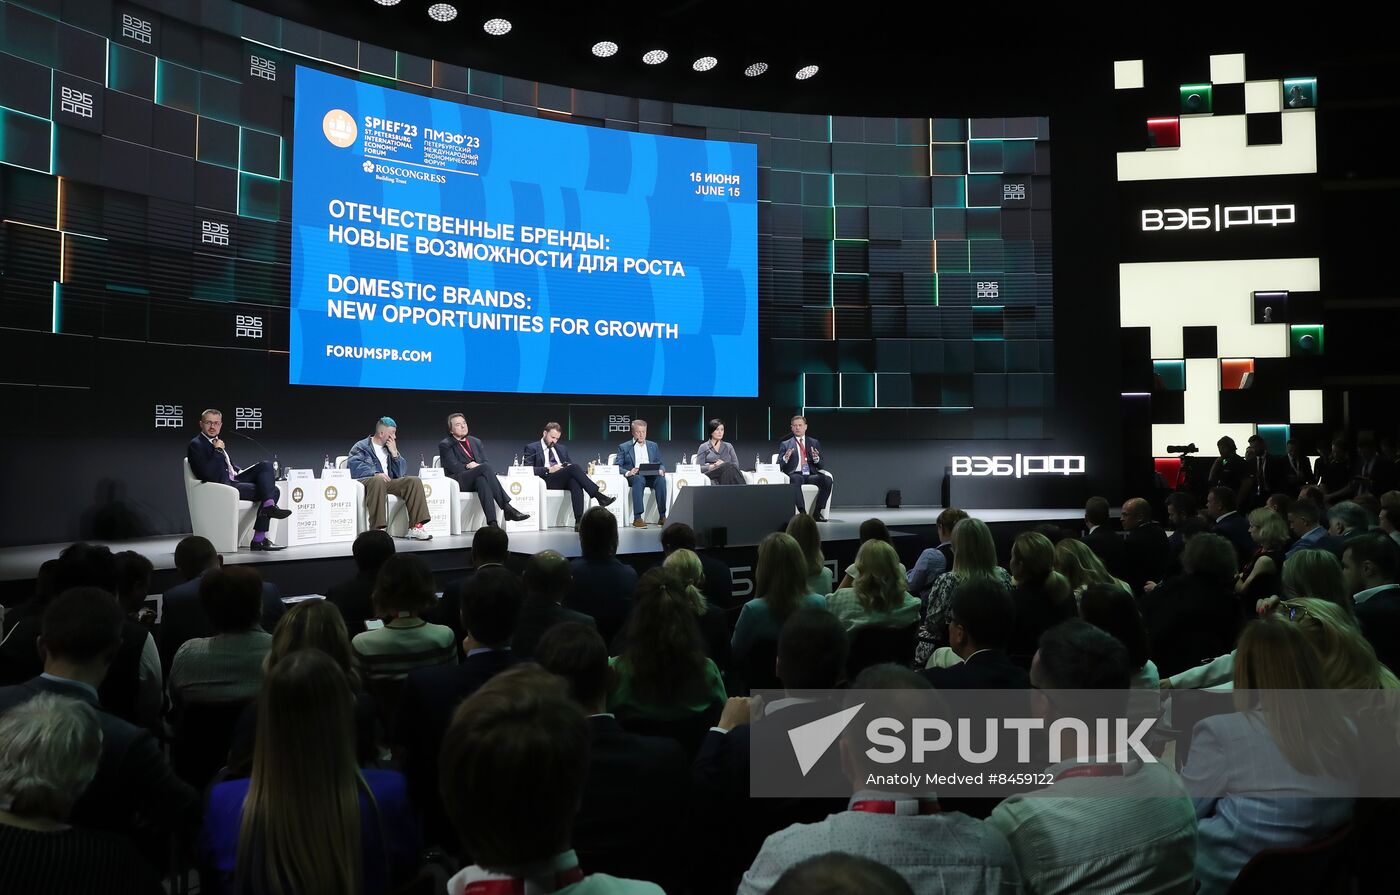 SPIEF-2023. Domestic Brands: New Opportunities for Growth